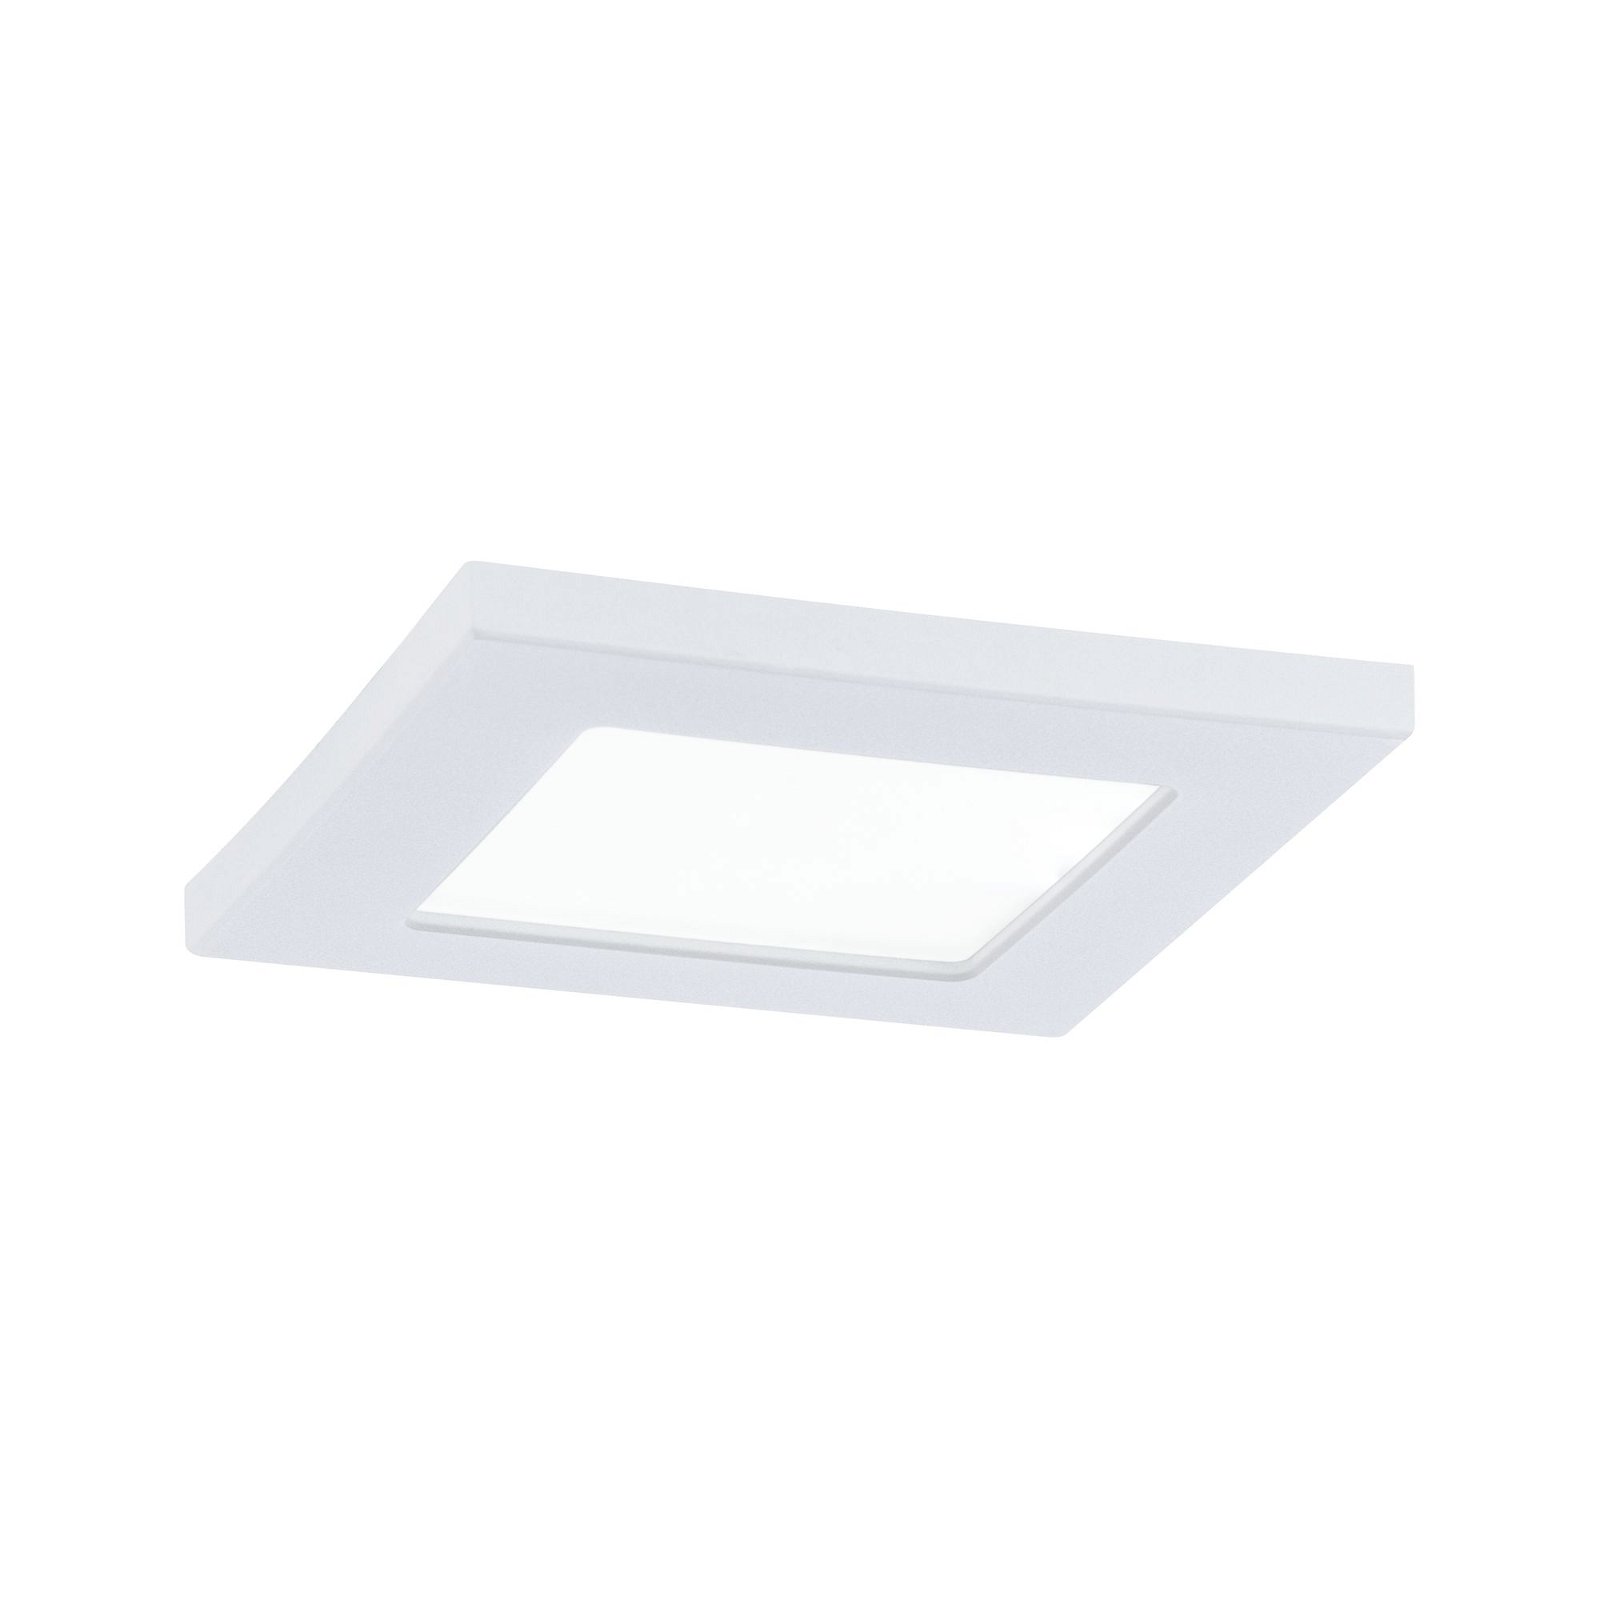 Clever Connect LED Spot Pola Tunable White 2,5W Weiß matt